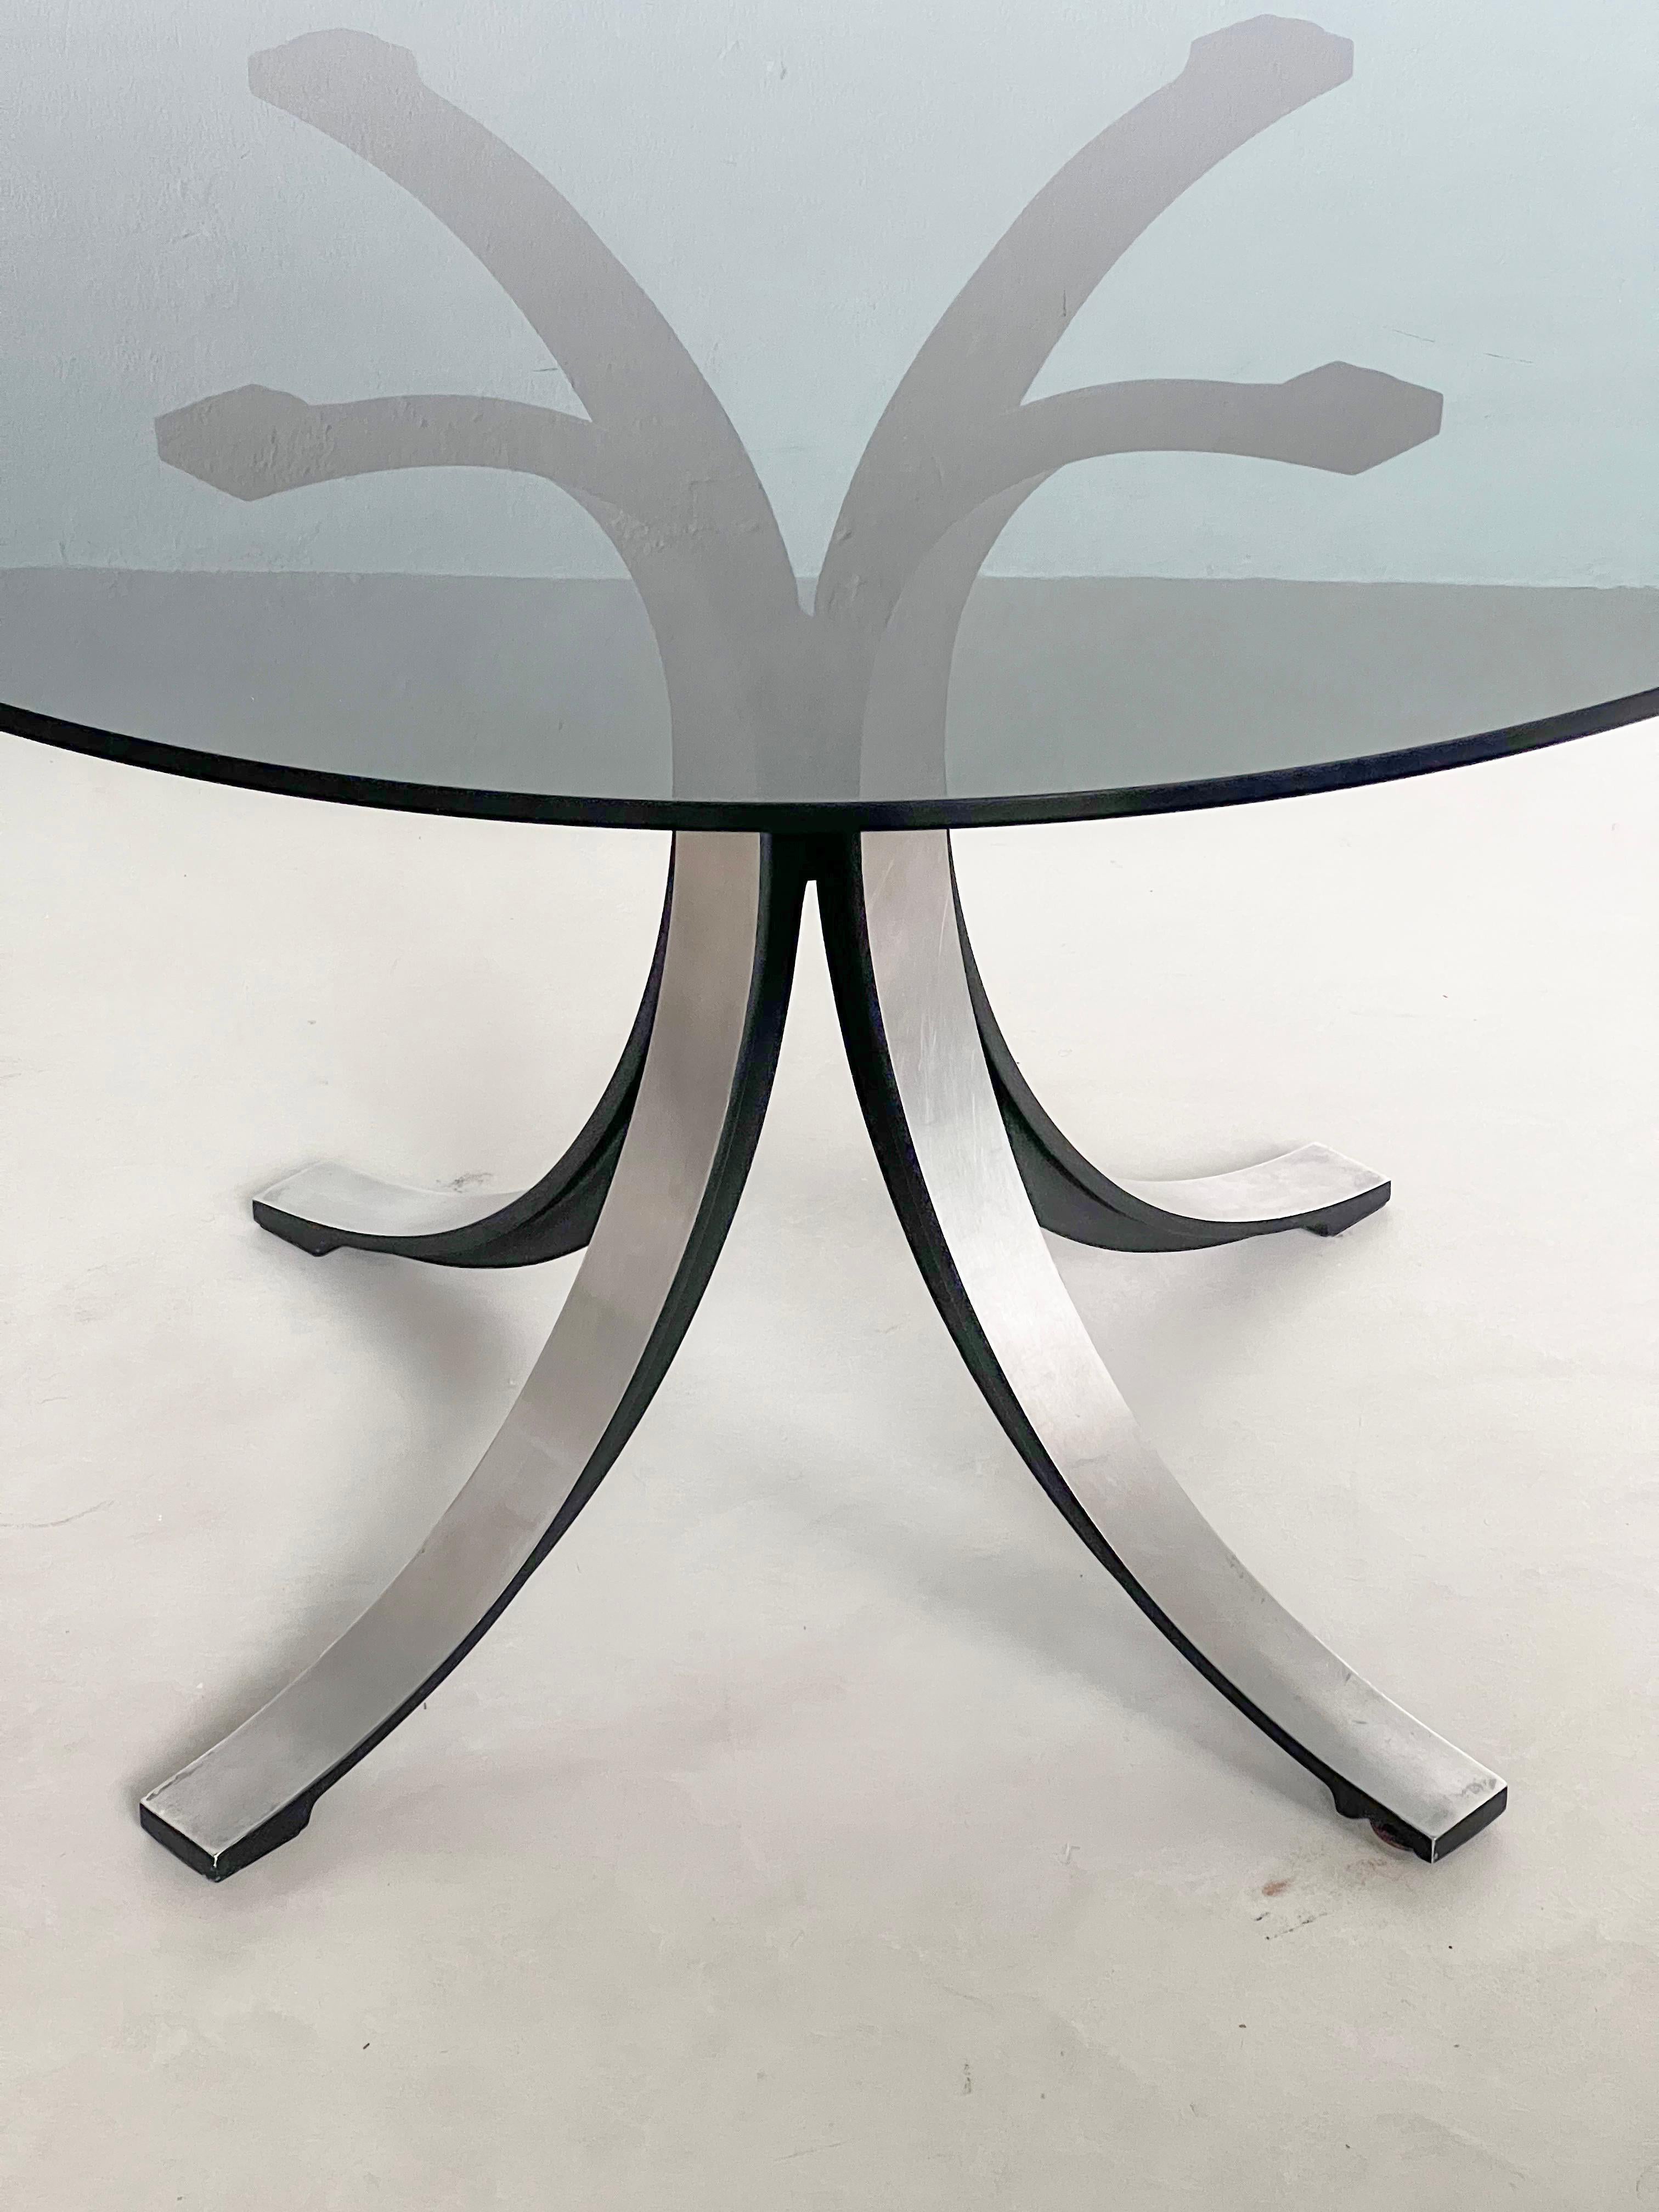 Vintage Italian Mid Century Modern Dining Table in Aluminium, Smoked Glass Top For Sale 1